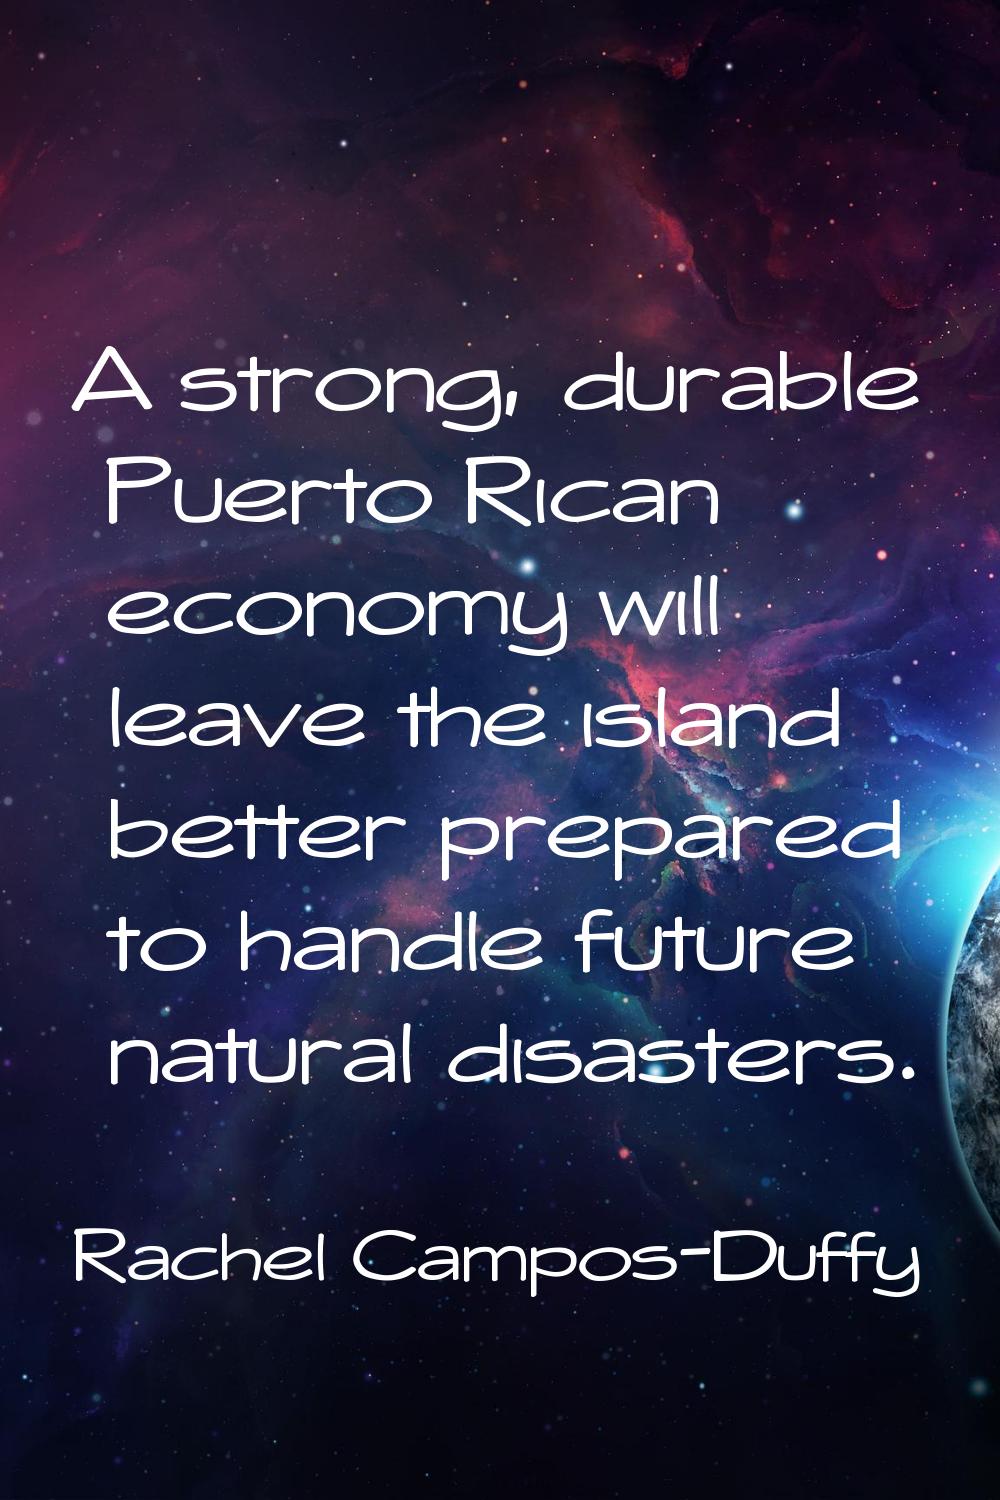 A strong, durable Puerto Rican economy will leave the island better prepared to handle future natur